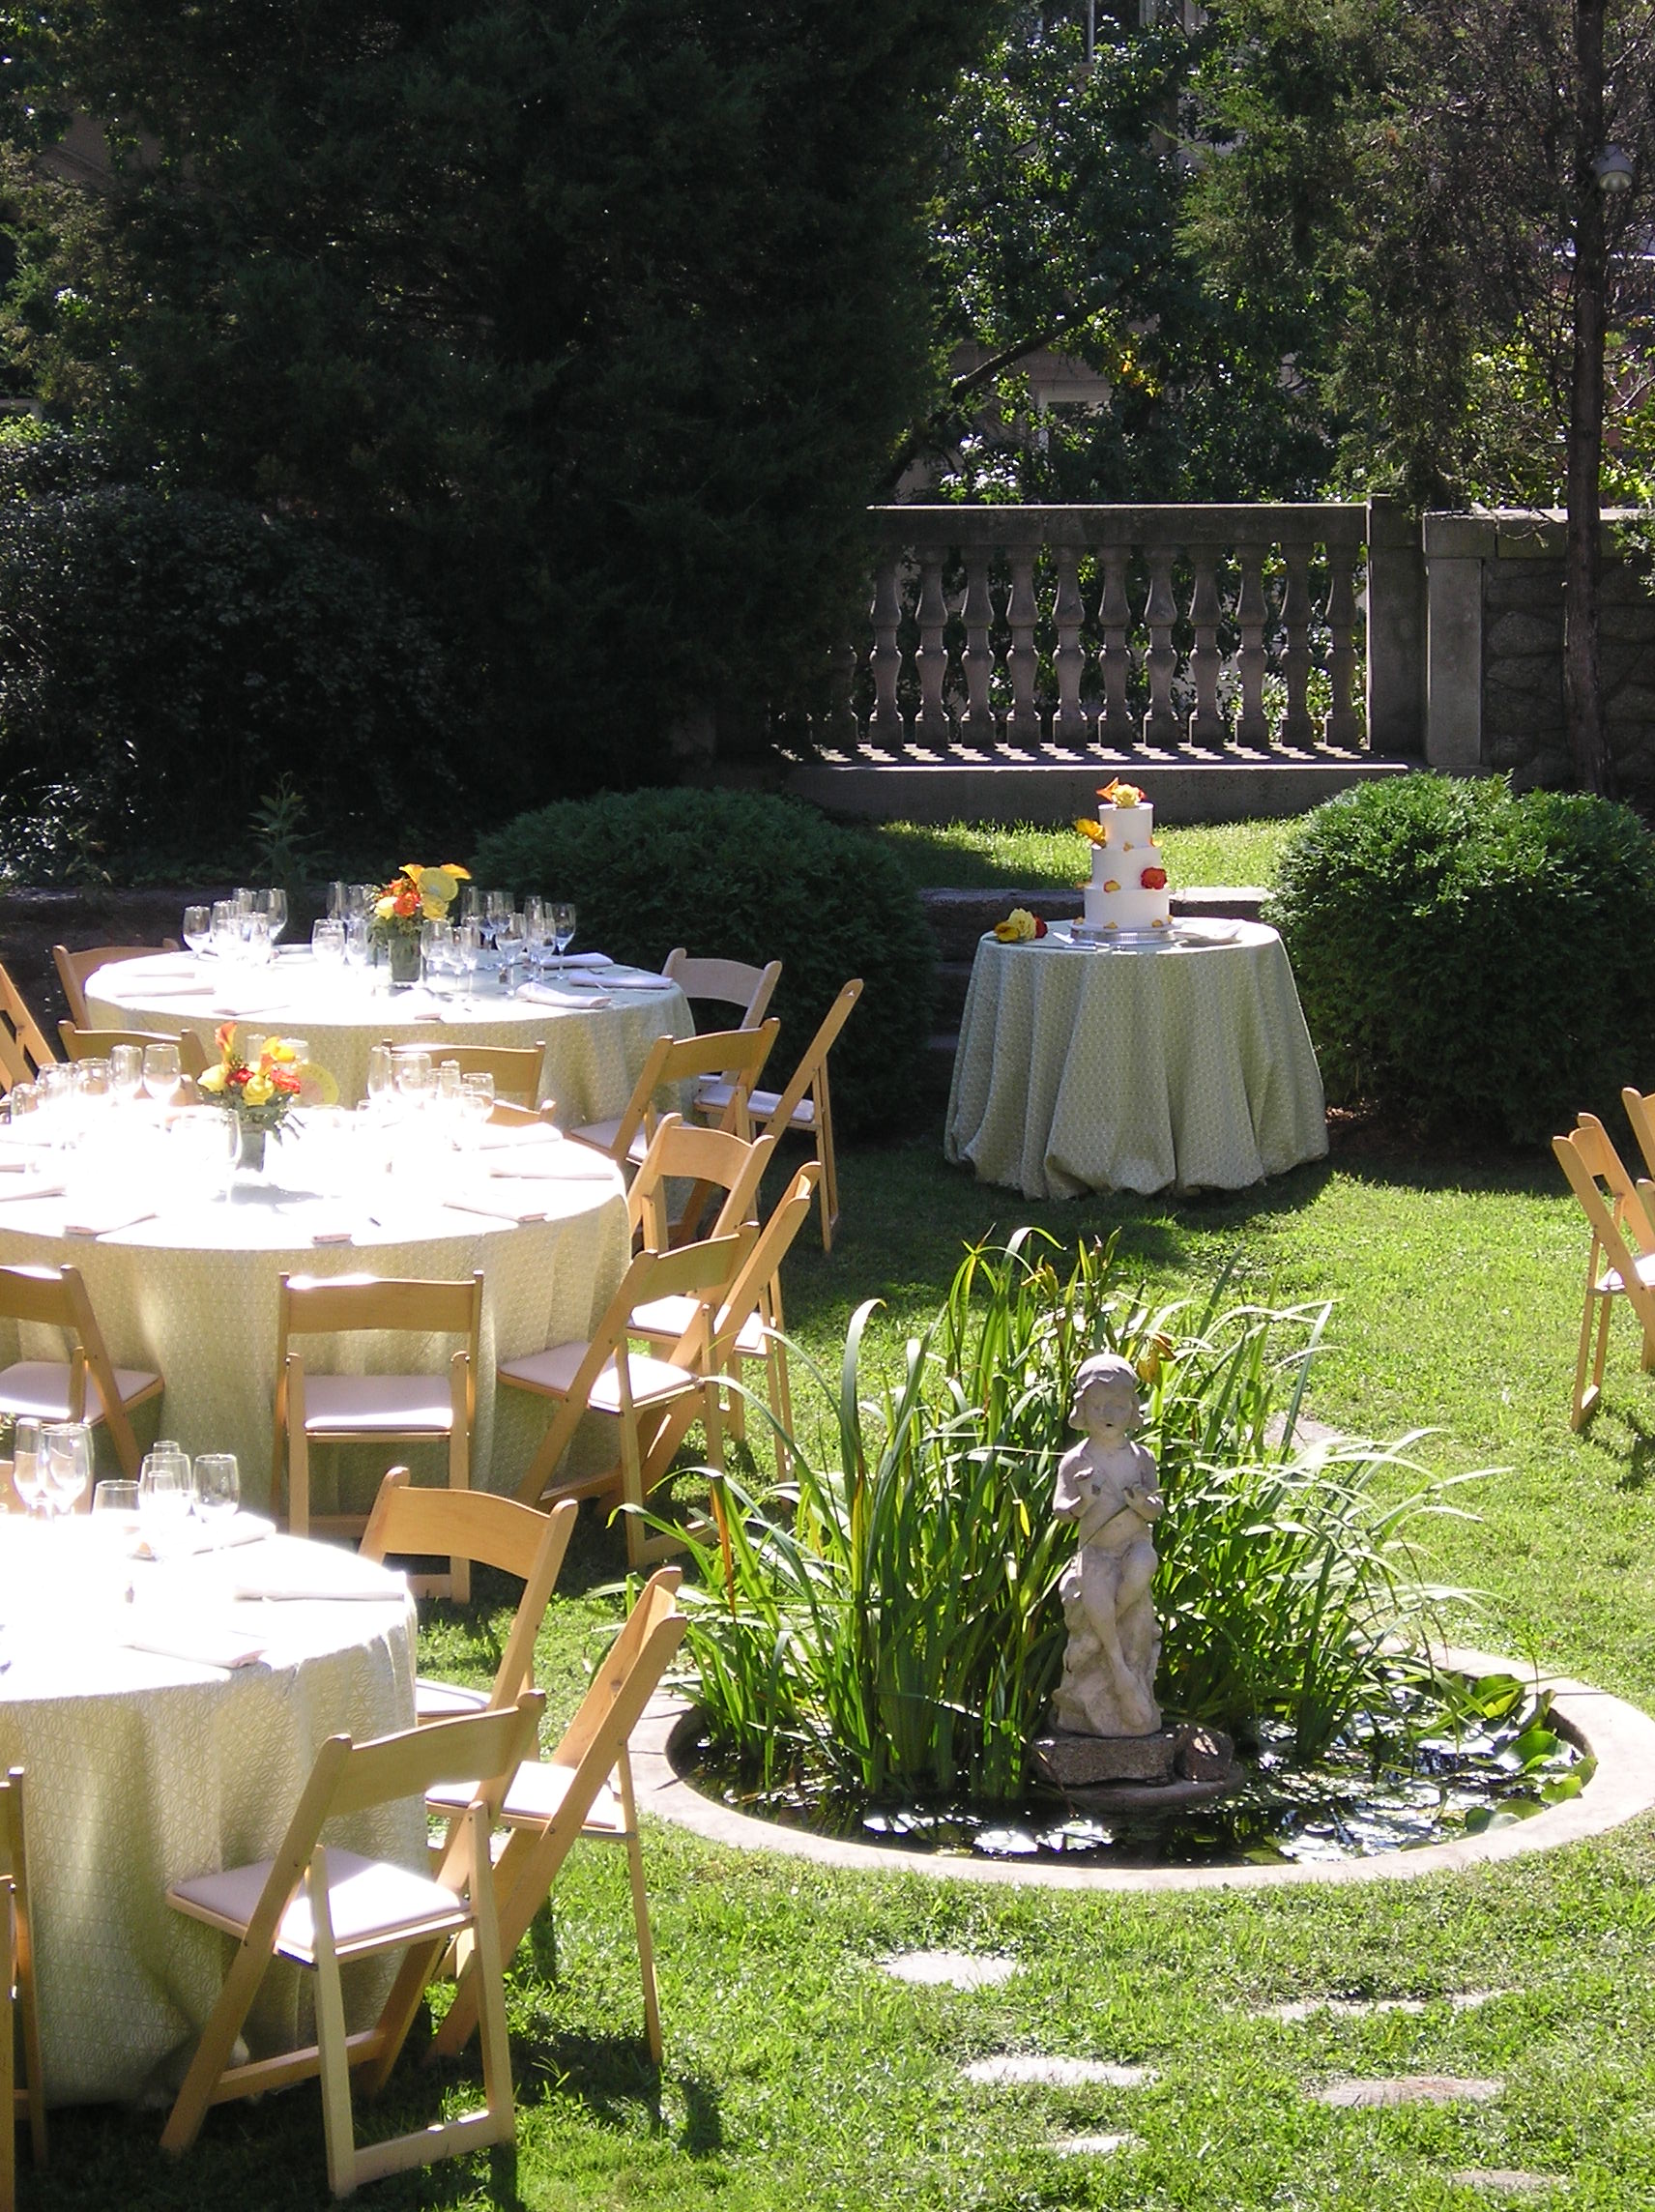 Round tables set up in the lower garden